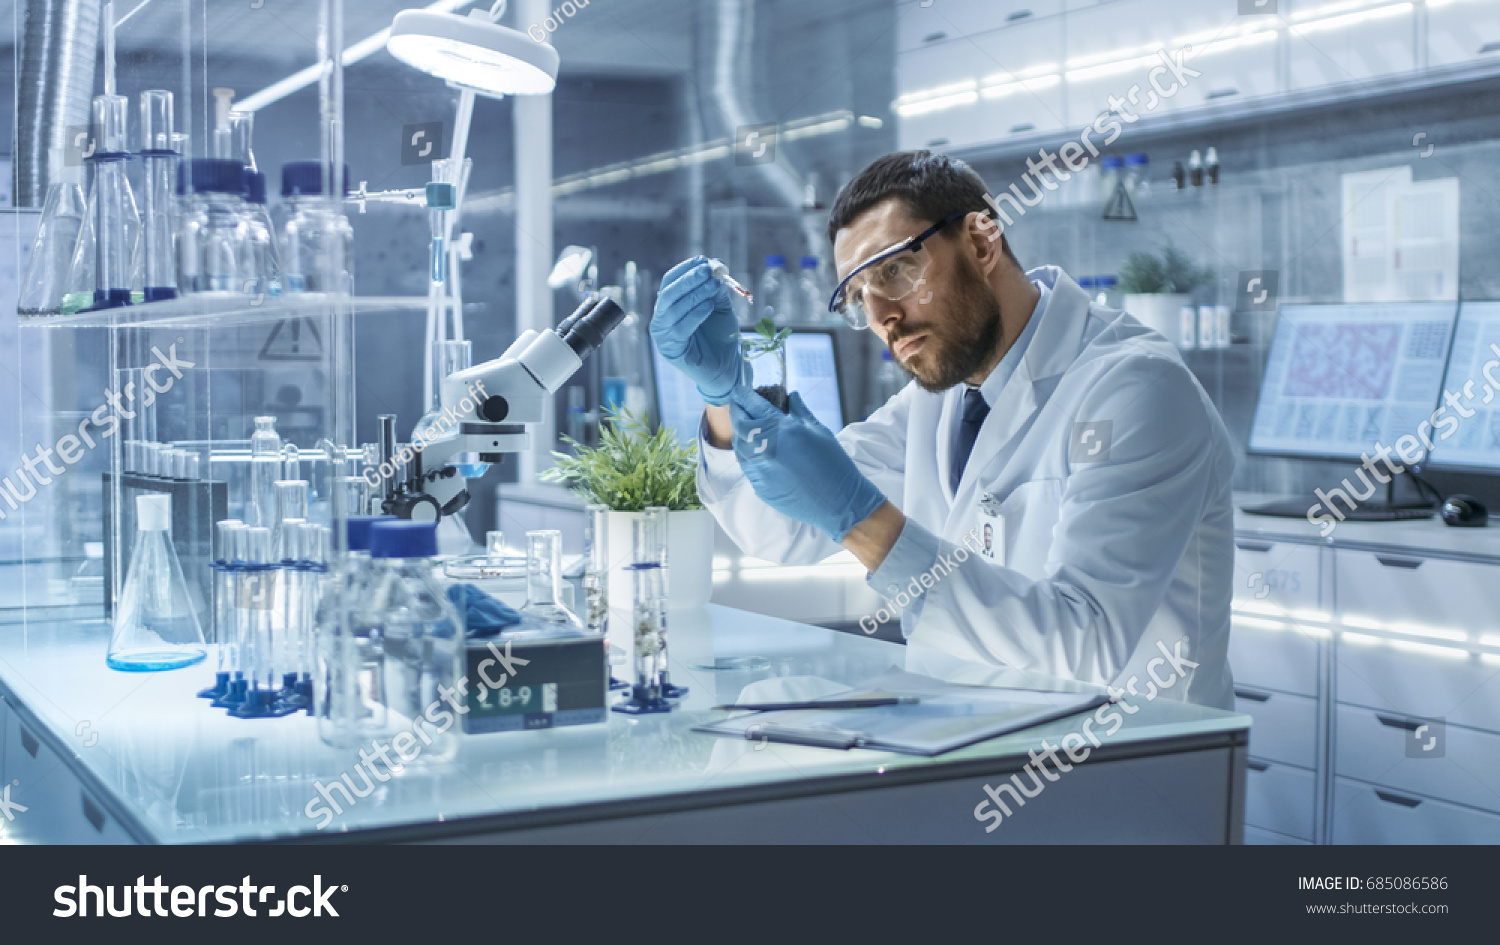 In a Modern Laboratory Research Scientist Conducts Experiments by Synthesising Compounds with use of Dropper and Plant in a Test Tube. #685086586